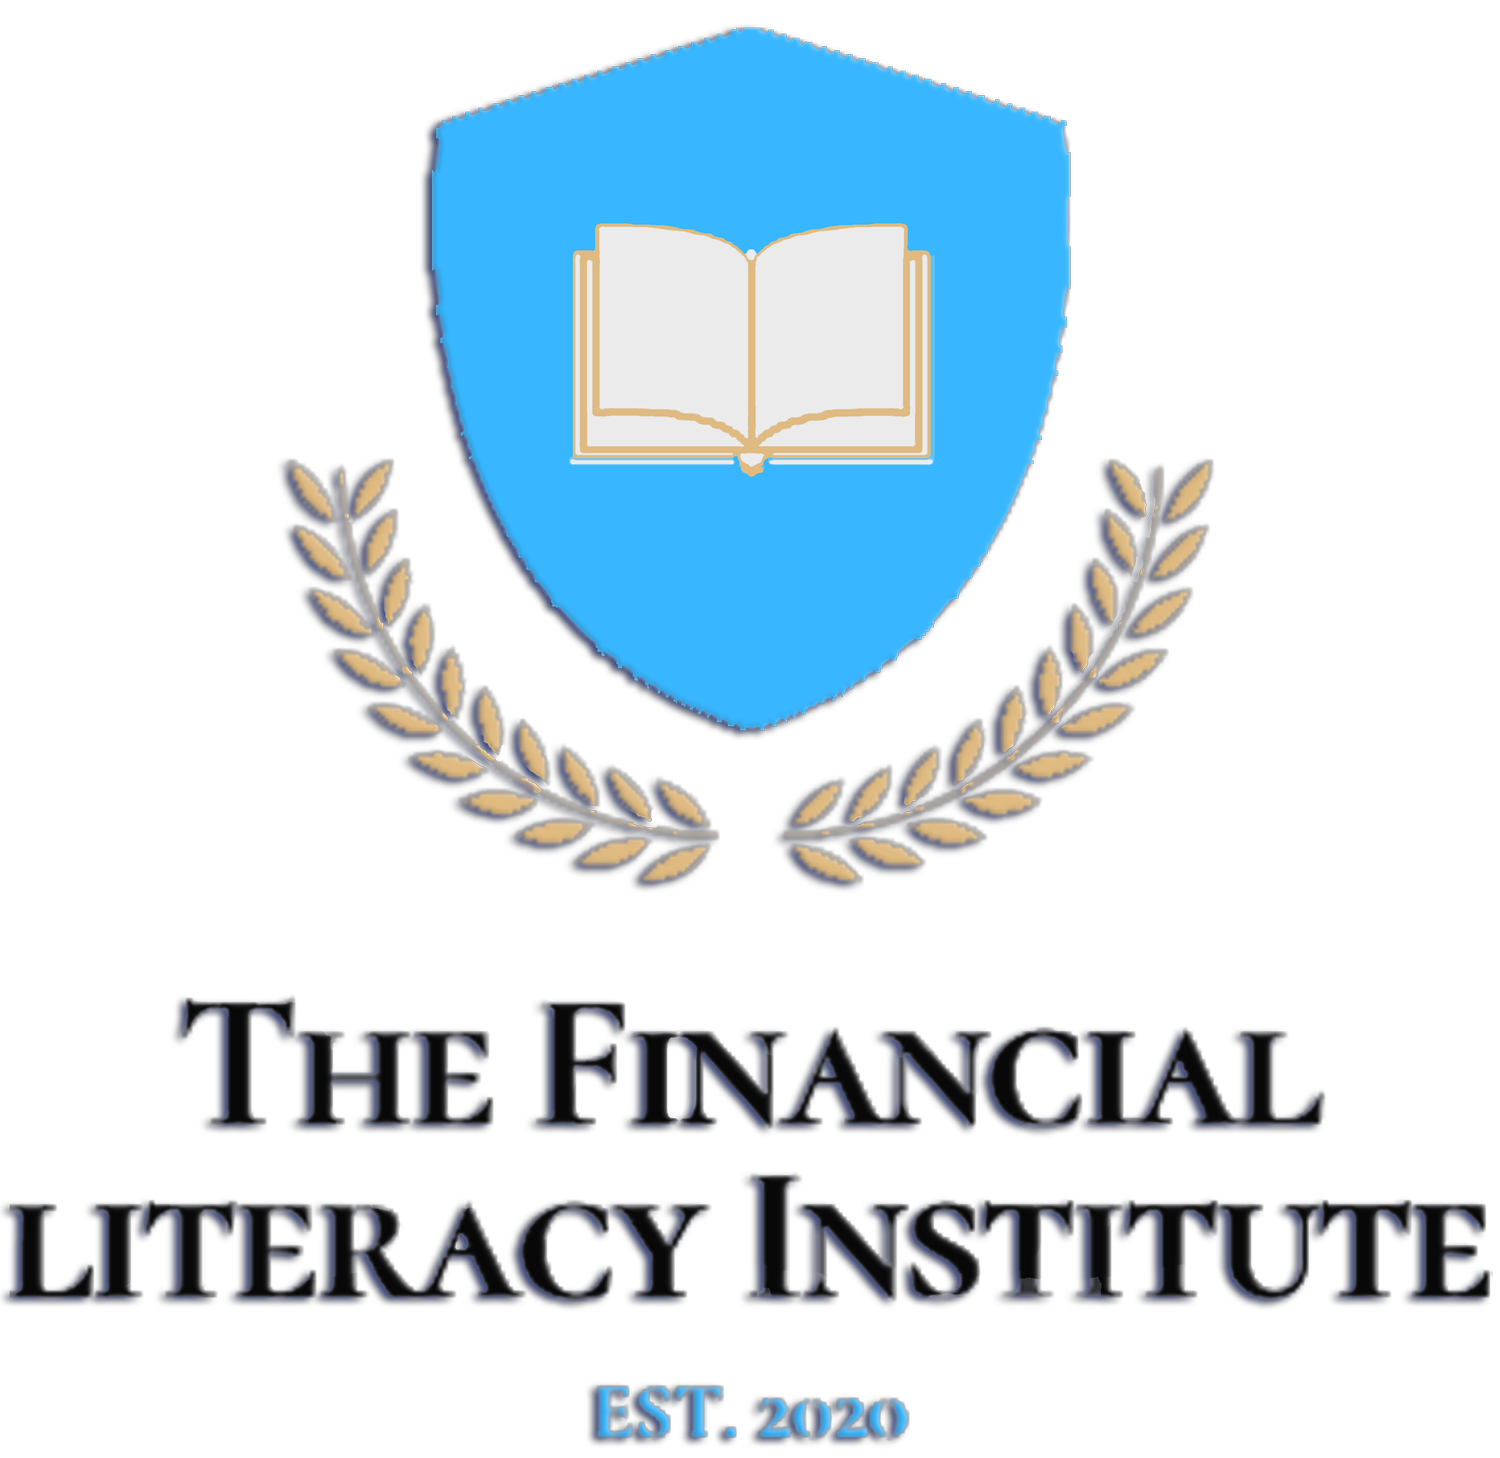 The Financial Literacy Institute